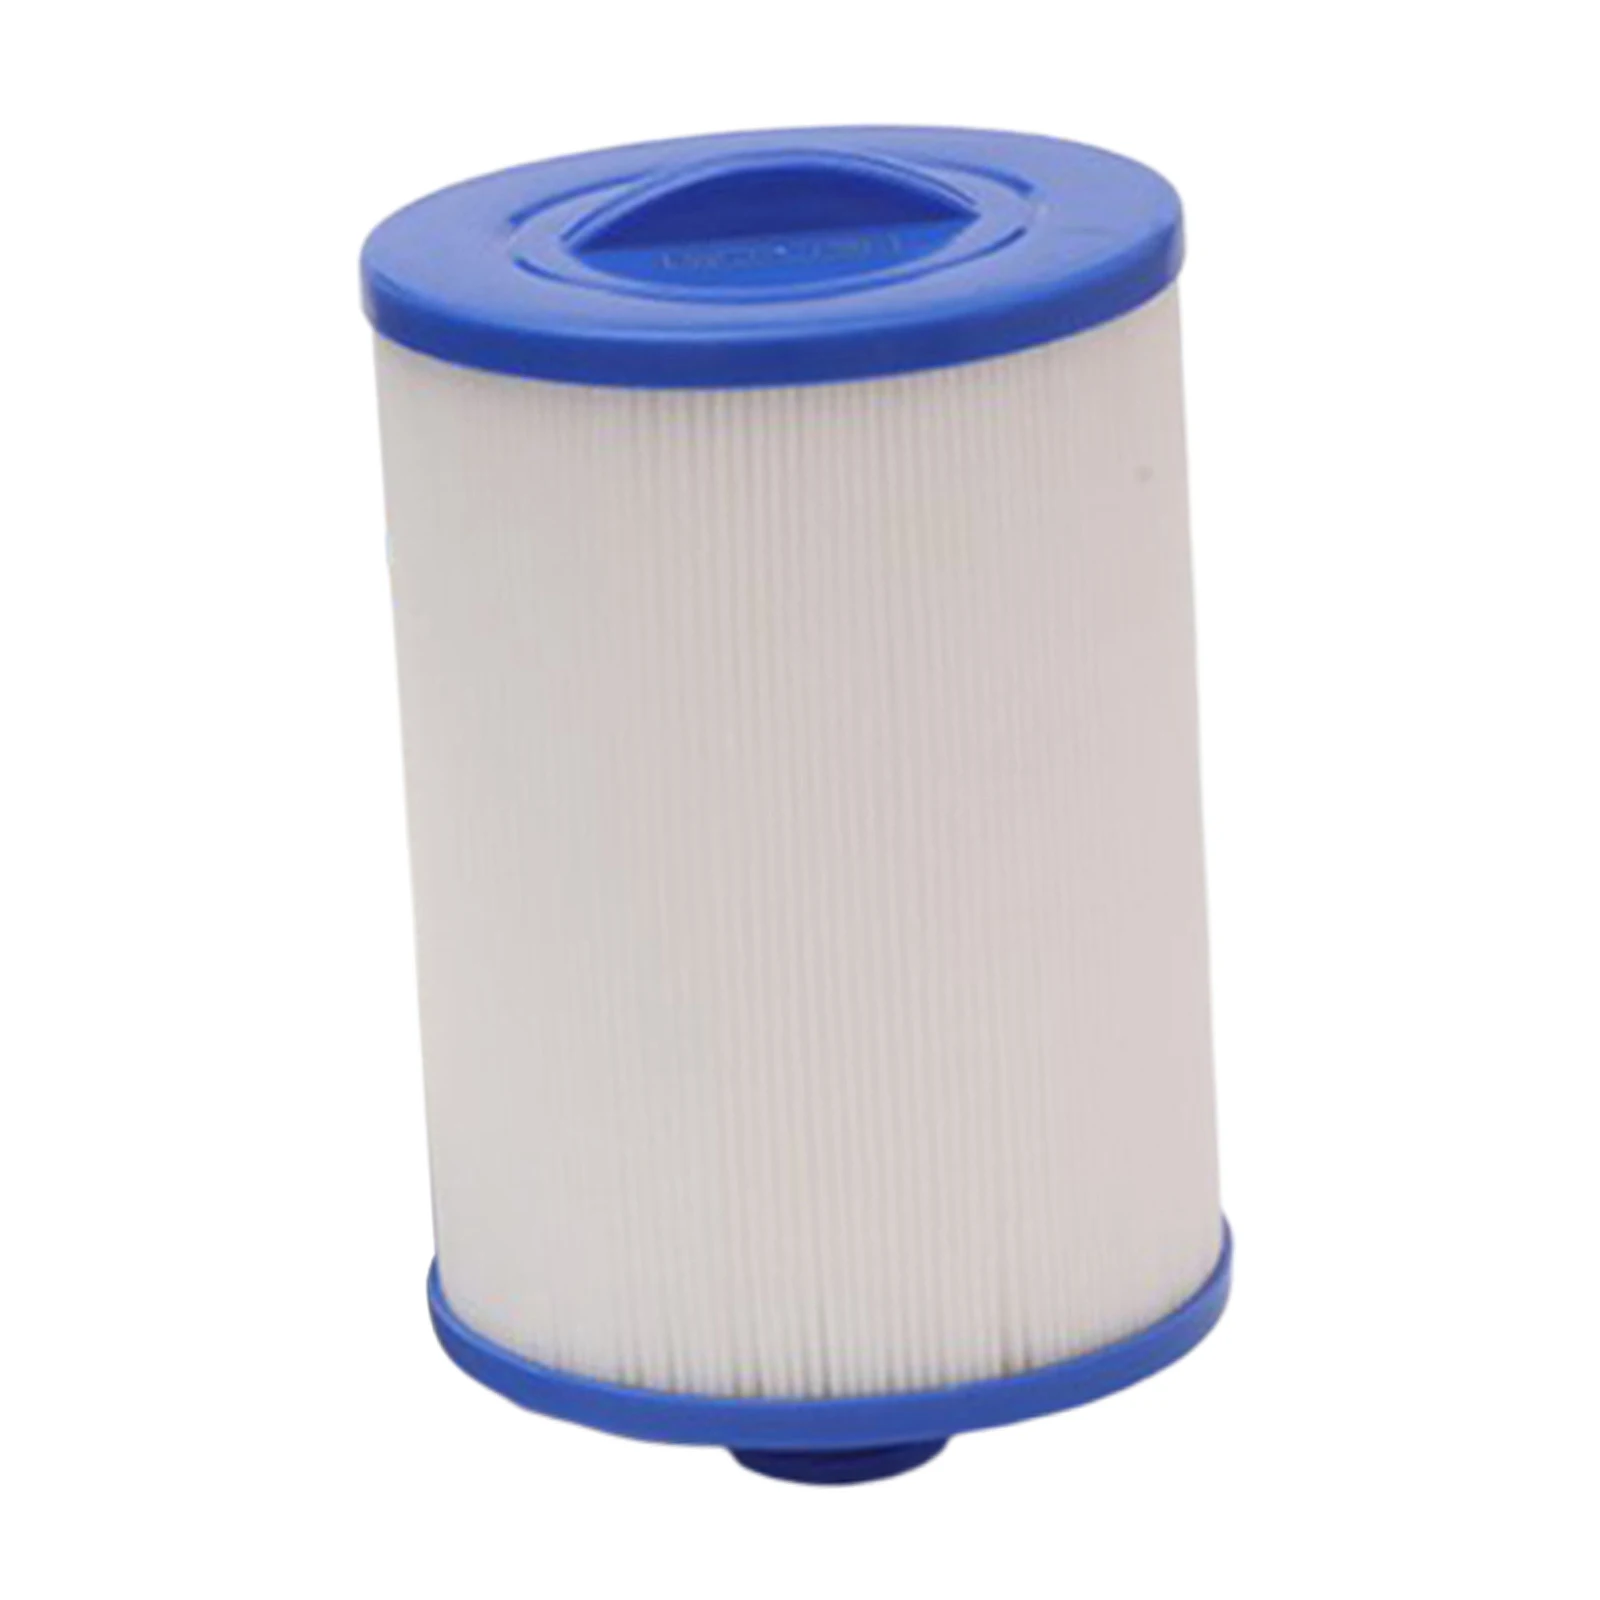 Spa Filter Cartridges Replacement for Pleatco PWW50P3 Spare Parts Premium